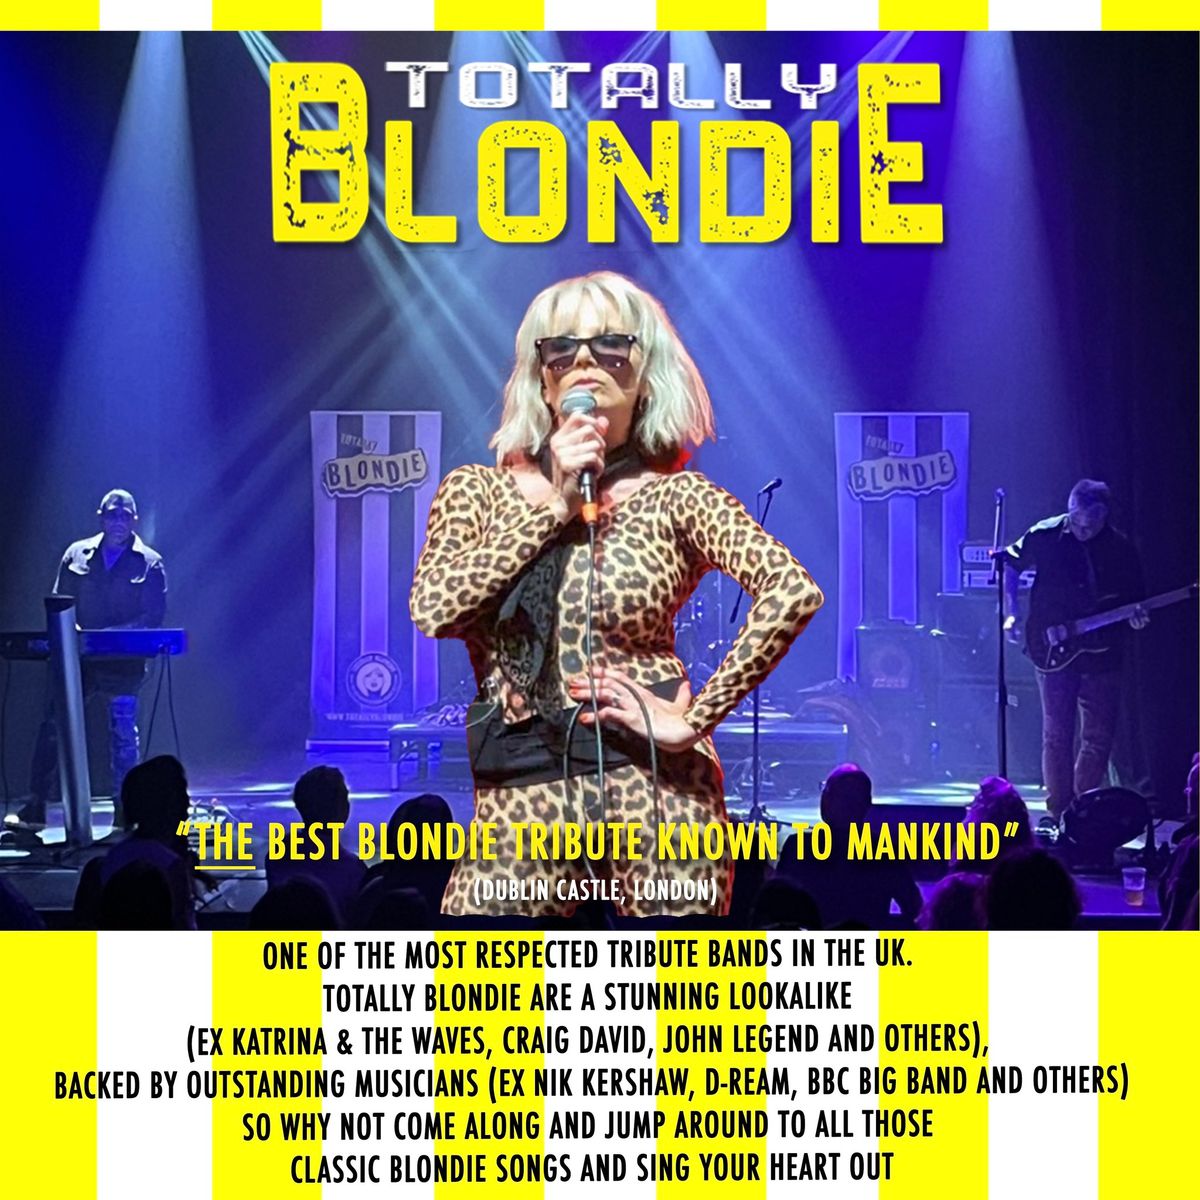 Totally Blondie Live at Cotton Club